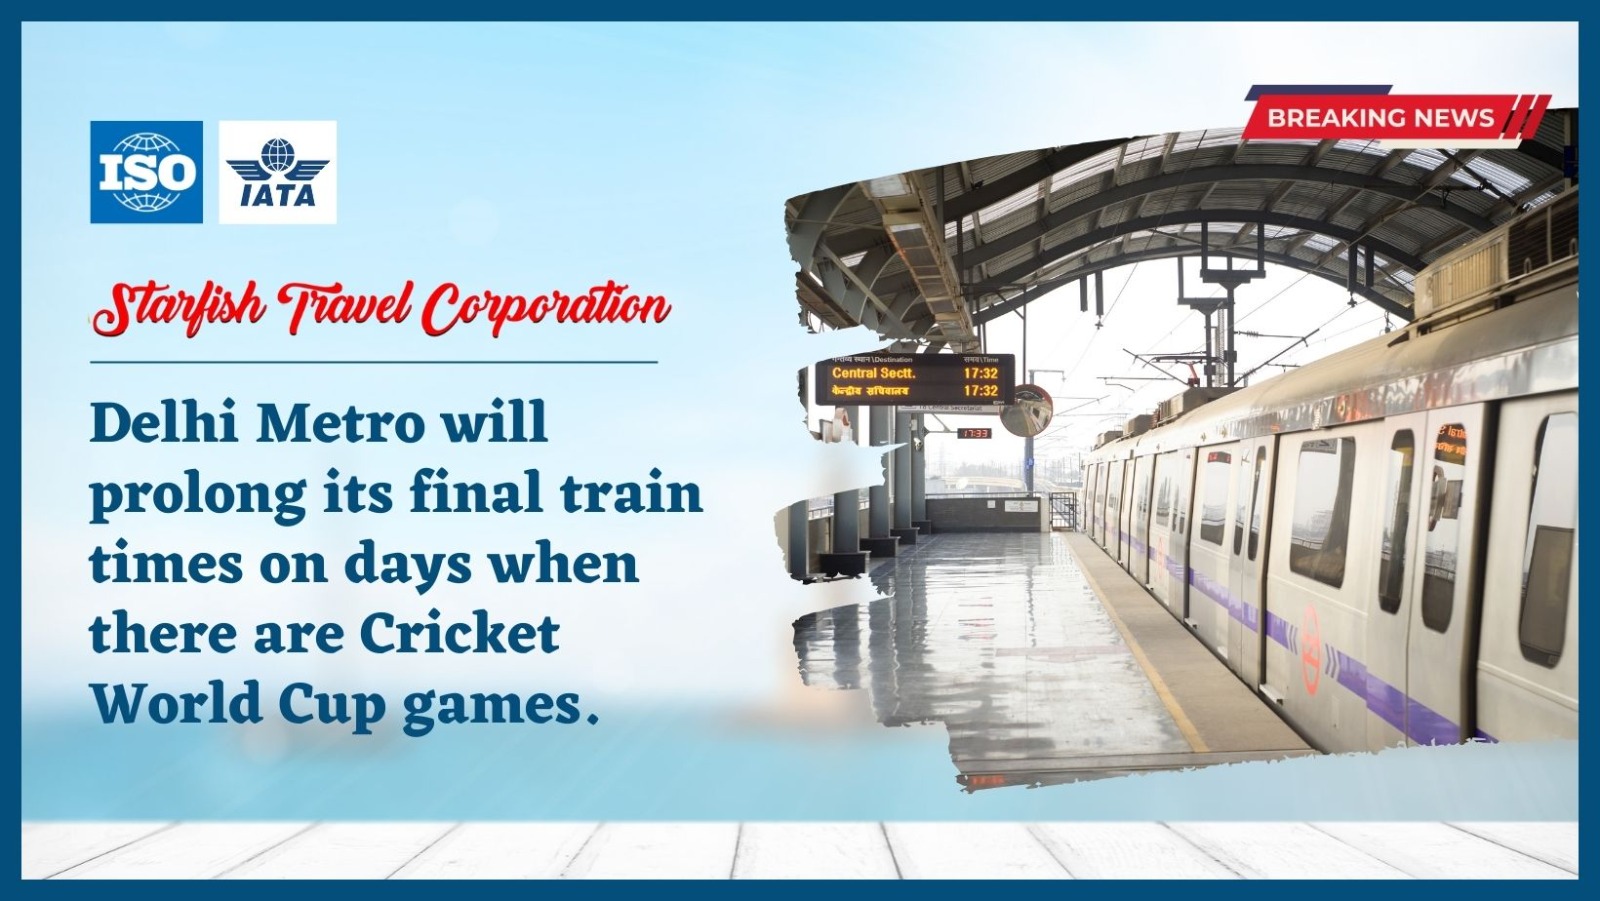 Delhi Metro will prolong its final train times on days when there are Cricket World Cup games.